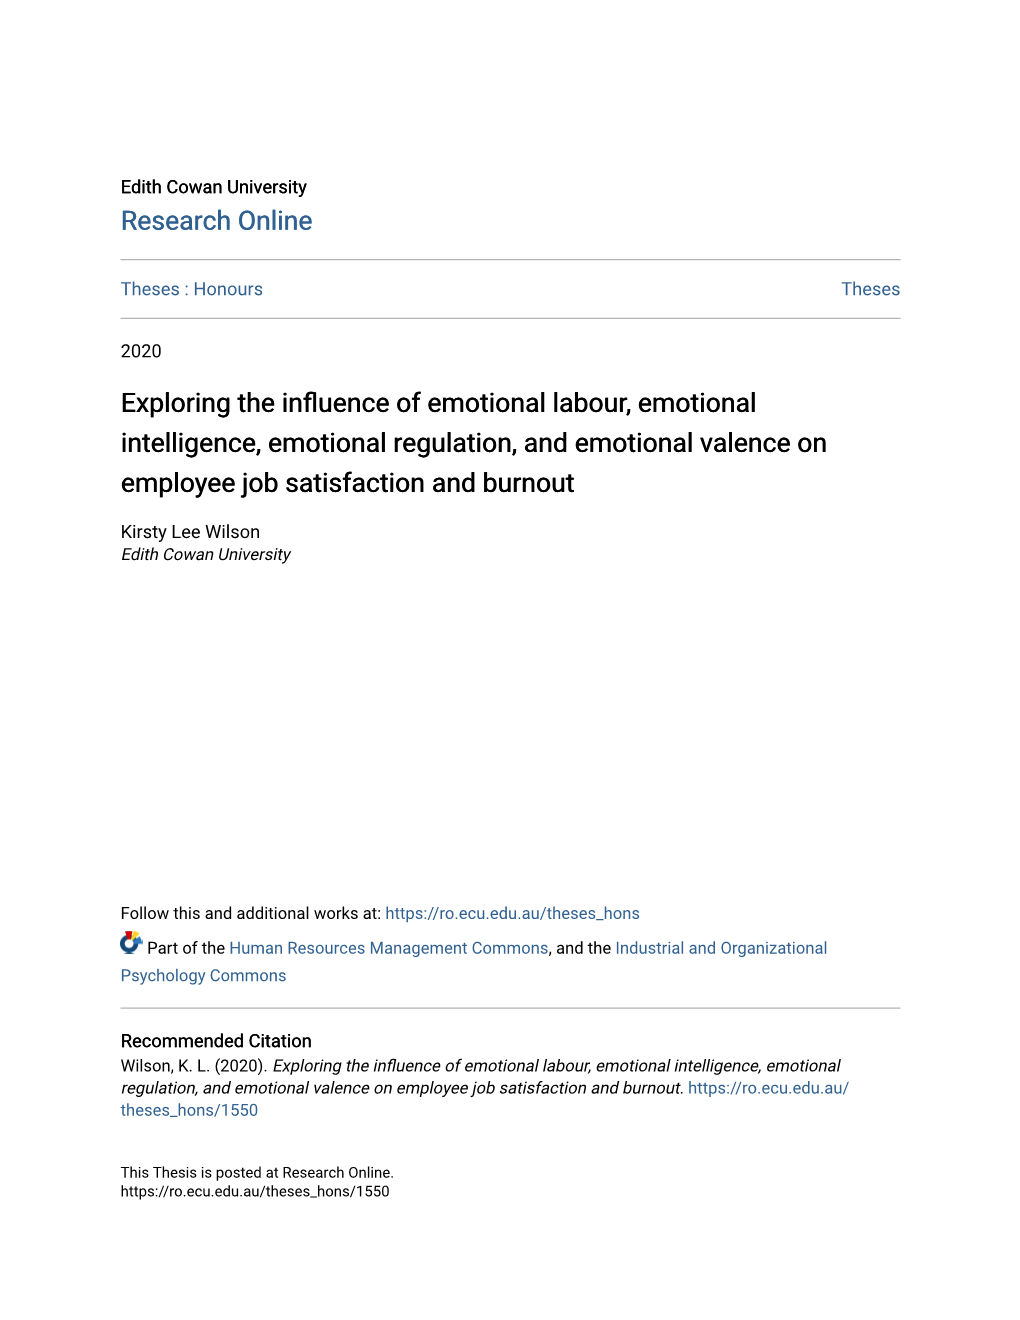 Exploring the Influence of Emotional Labour, Emotional Intelligence, Emotional Regulation, and Emotional Valence on Employee Job Satisfaction and Burnout